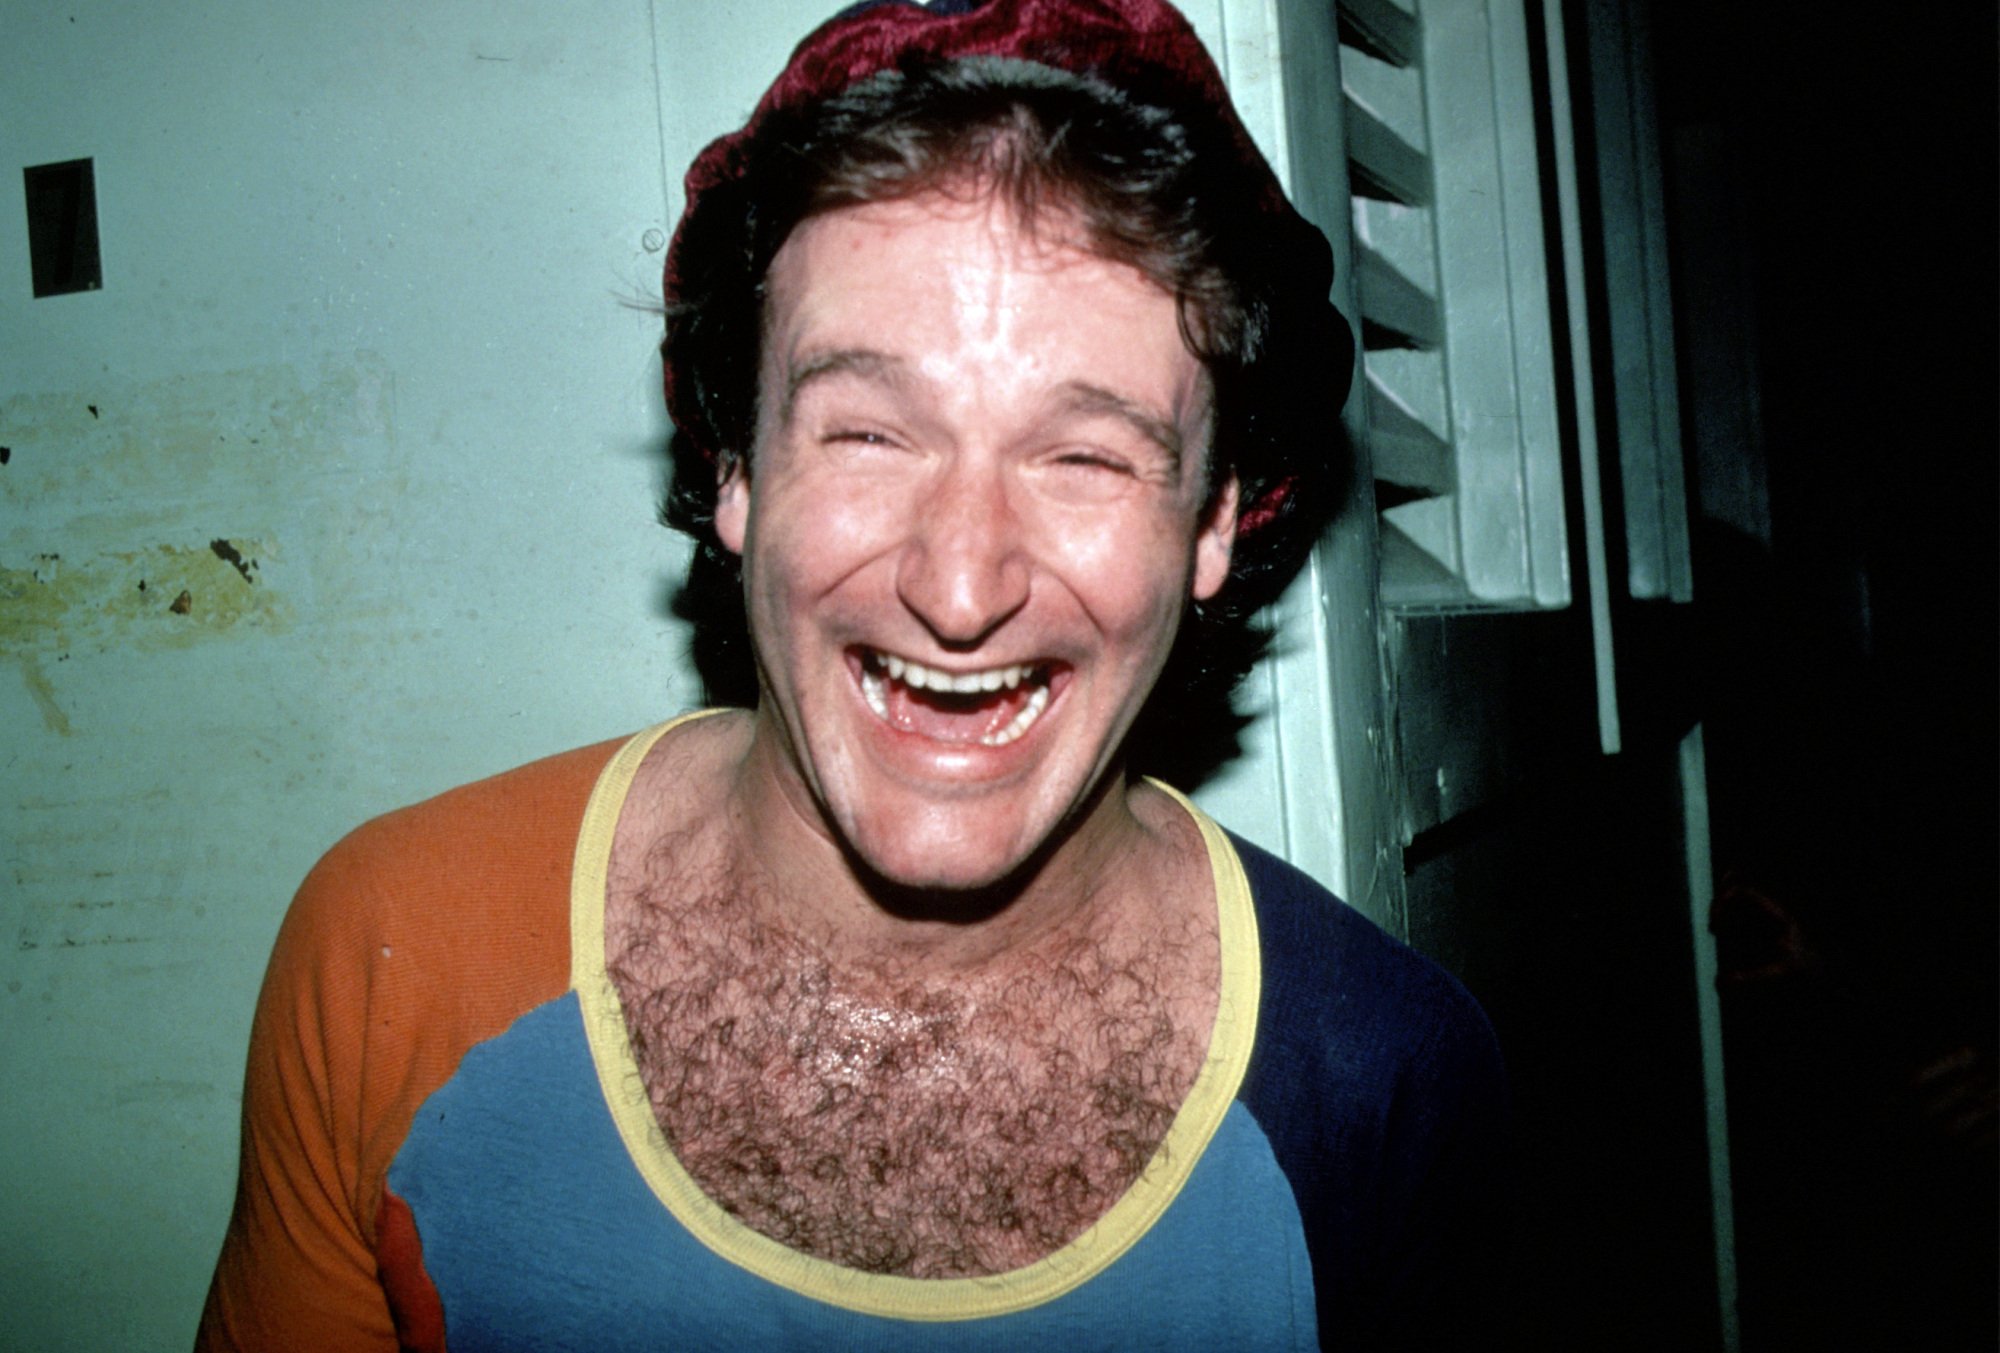 Robin Williams laughing in 1980